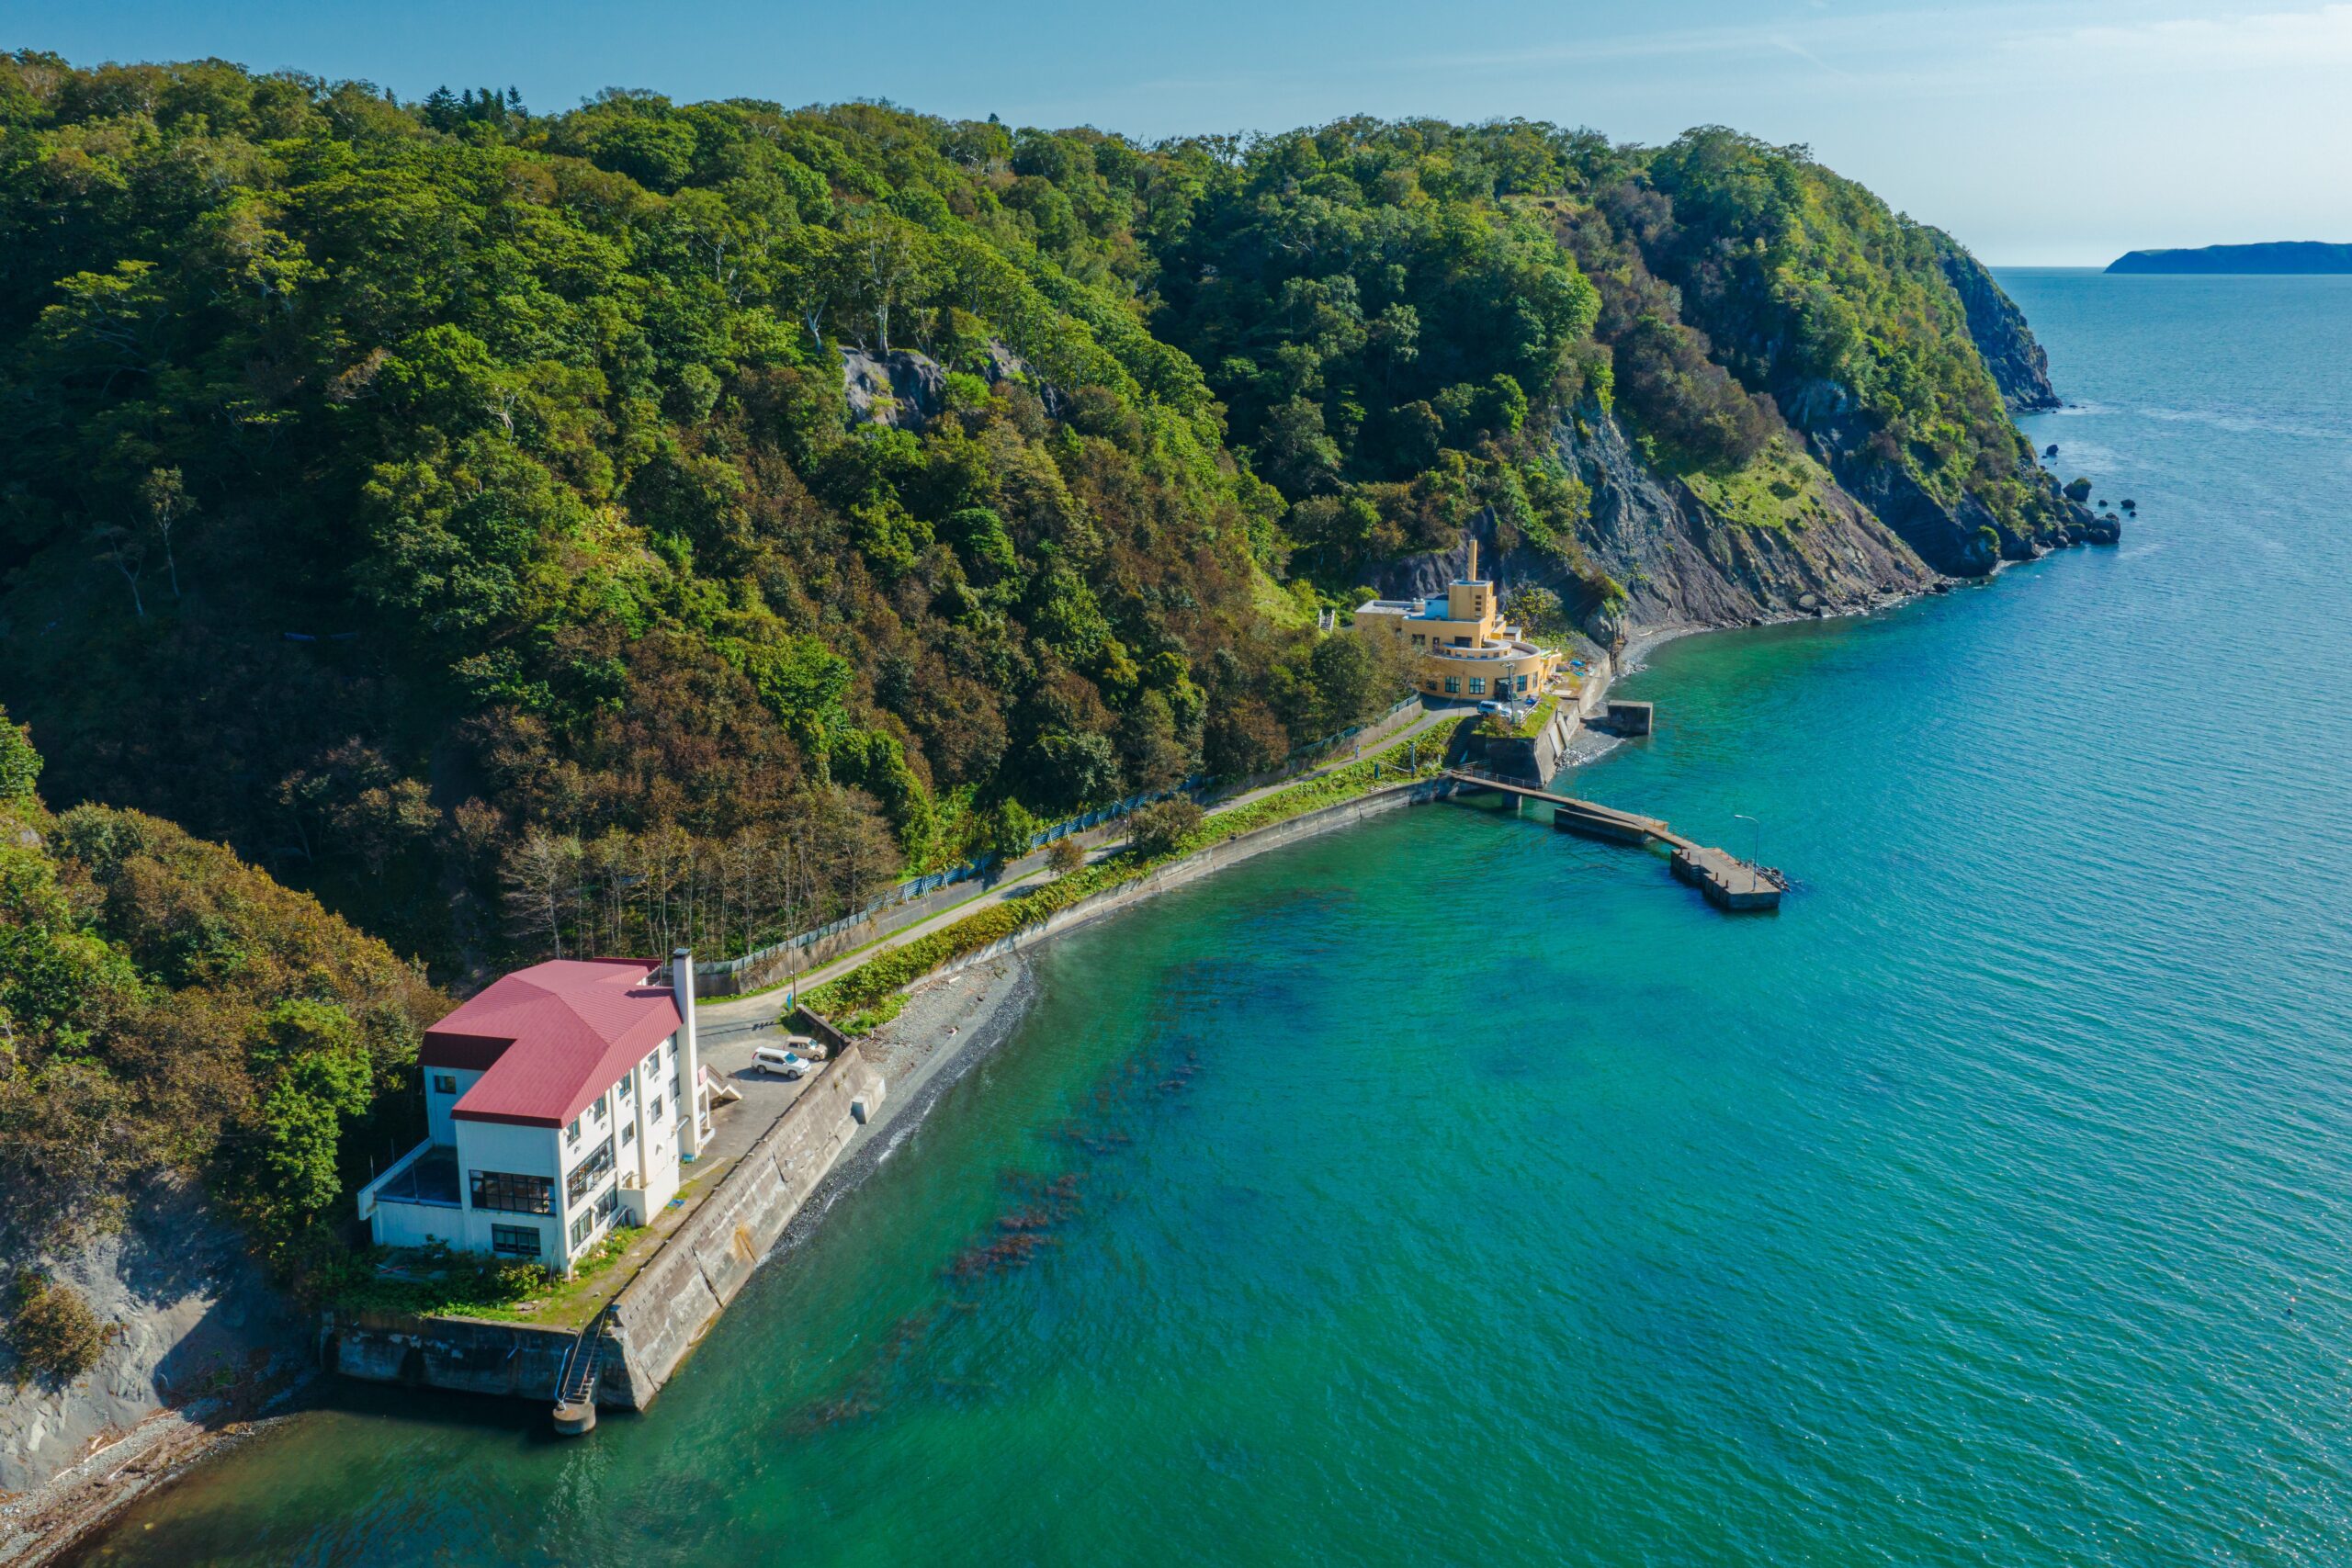 An aerial view of Hokkaido University’s Akkeshi Marine Station under the cliffs covered with greens. A white building is at the foreground and a yellow building is at the background, both connected by a road. A pier is in between. The land is facing the blue sea.